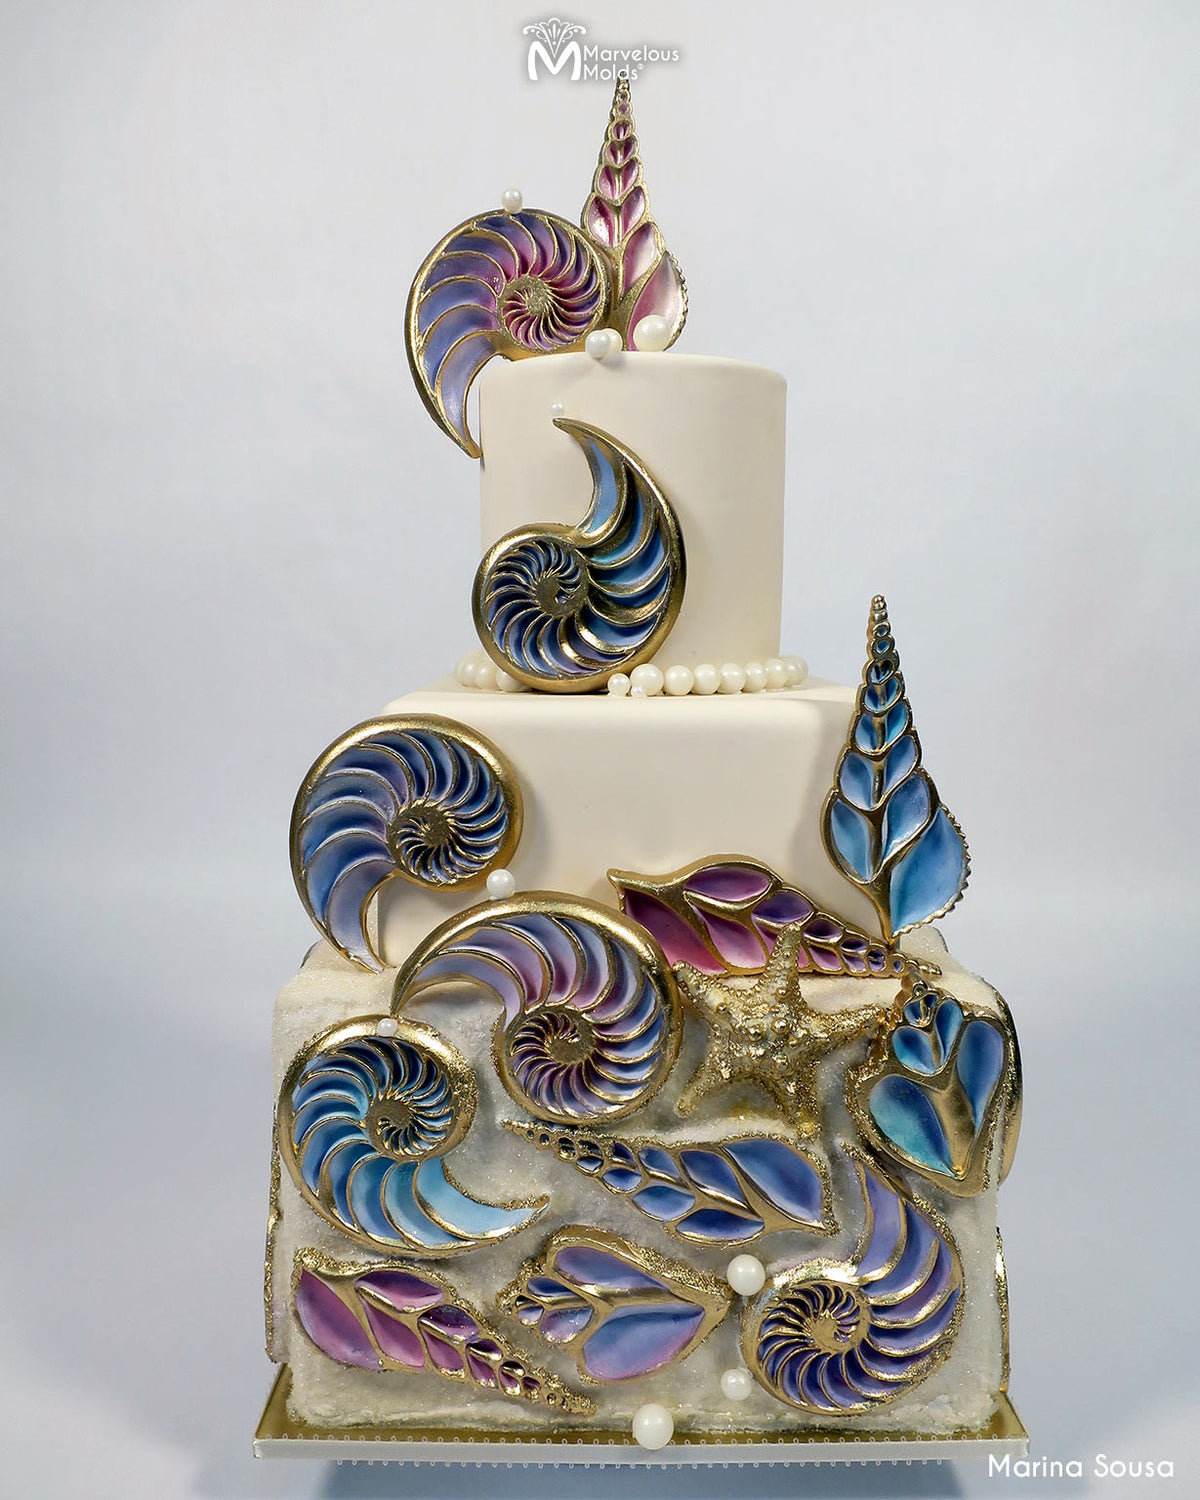 Seashell Cake Decorated with Marvelous Molds Silicone Nautilus Shell Right Mold